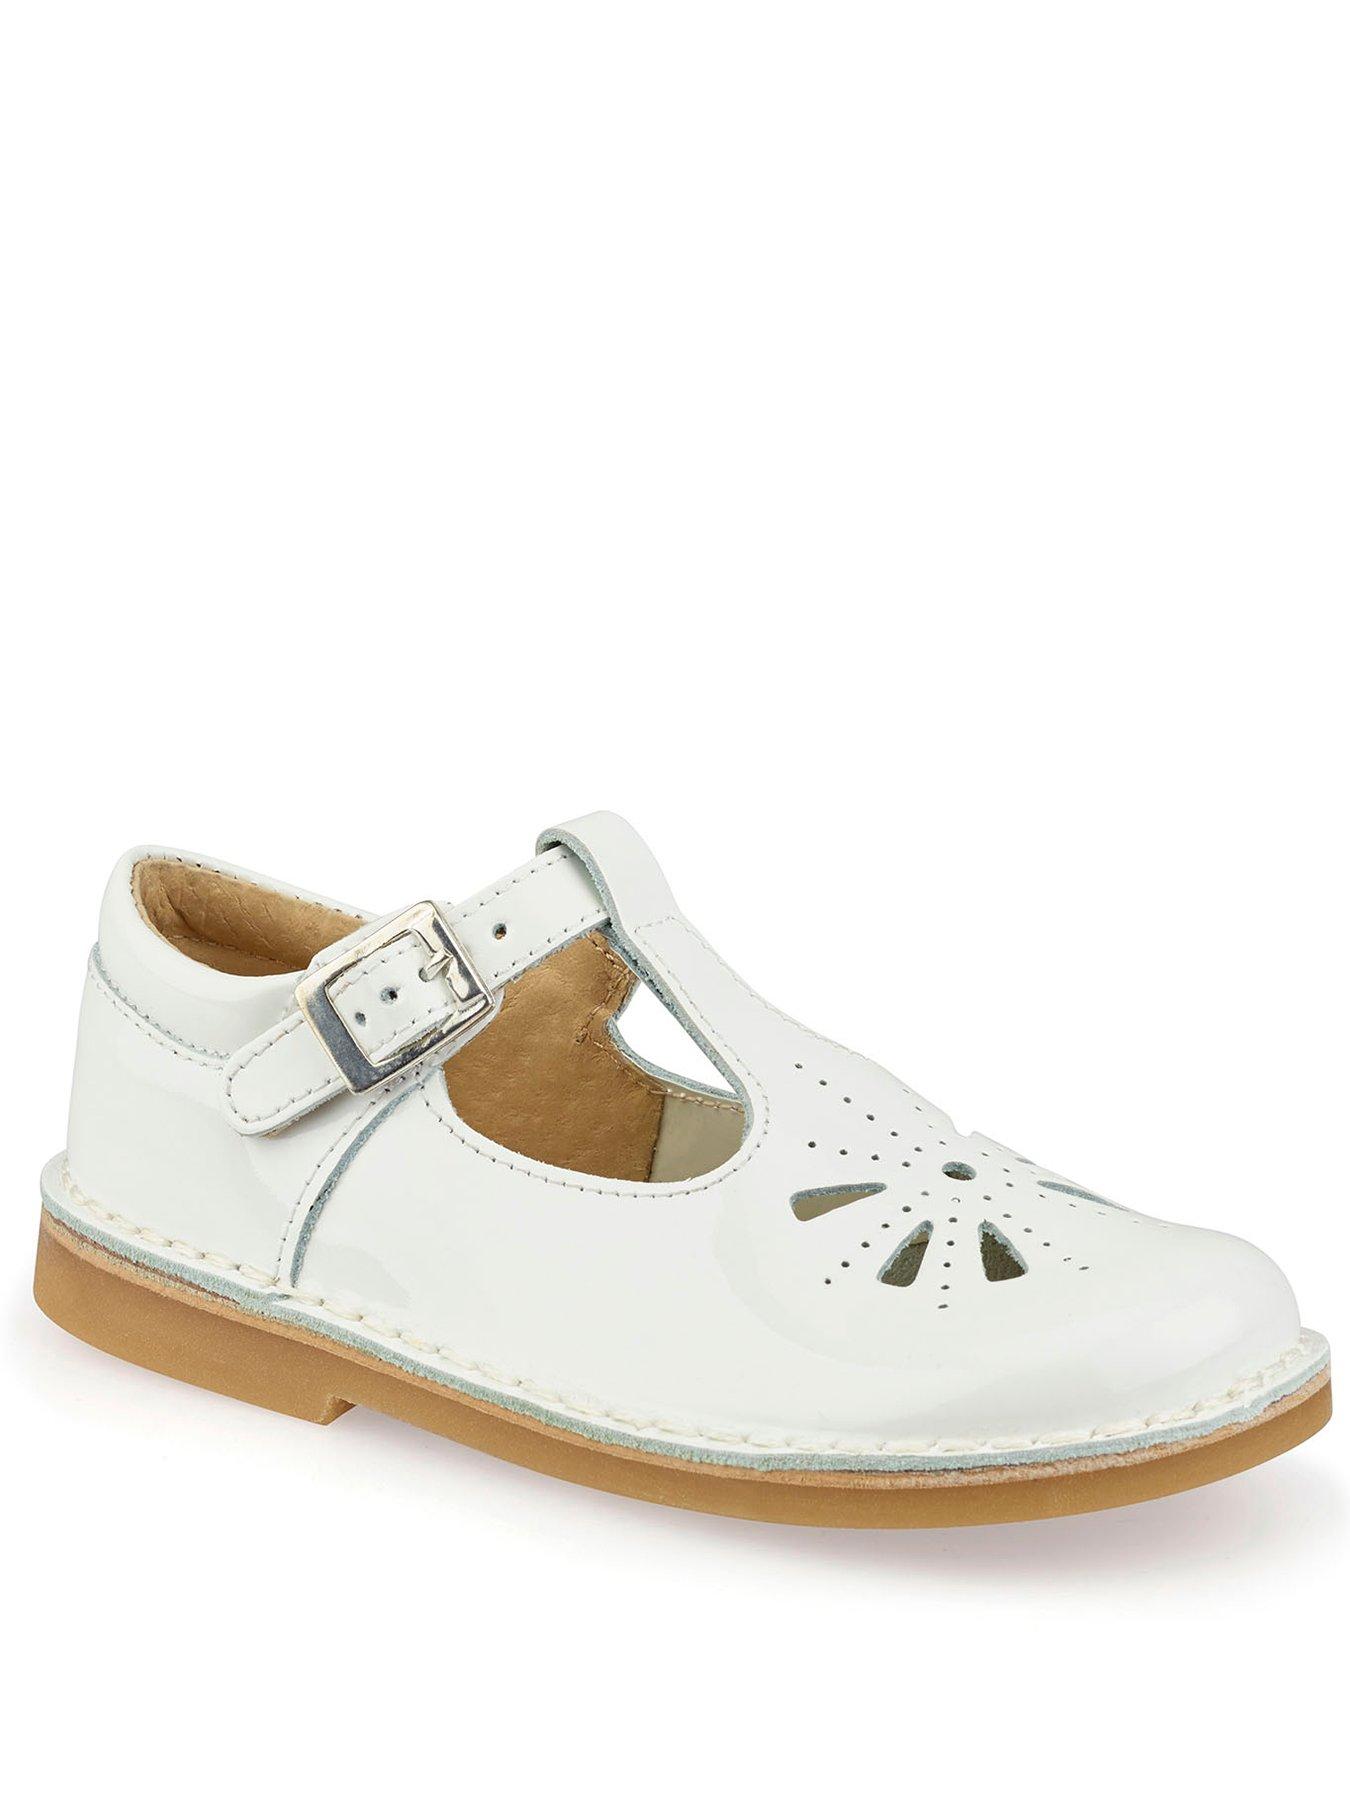 baby girl white t bar shoes